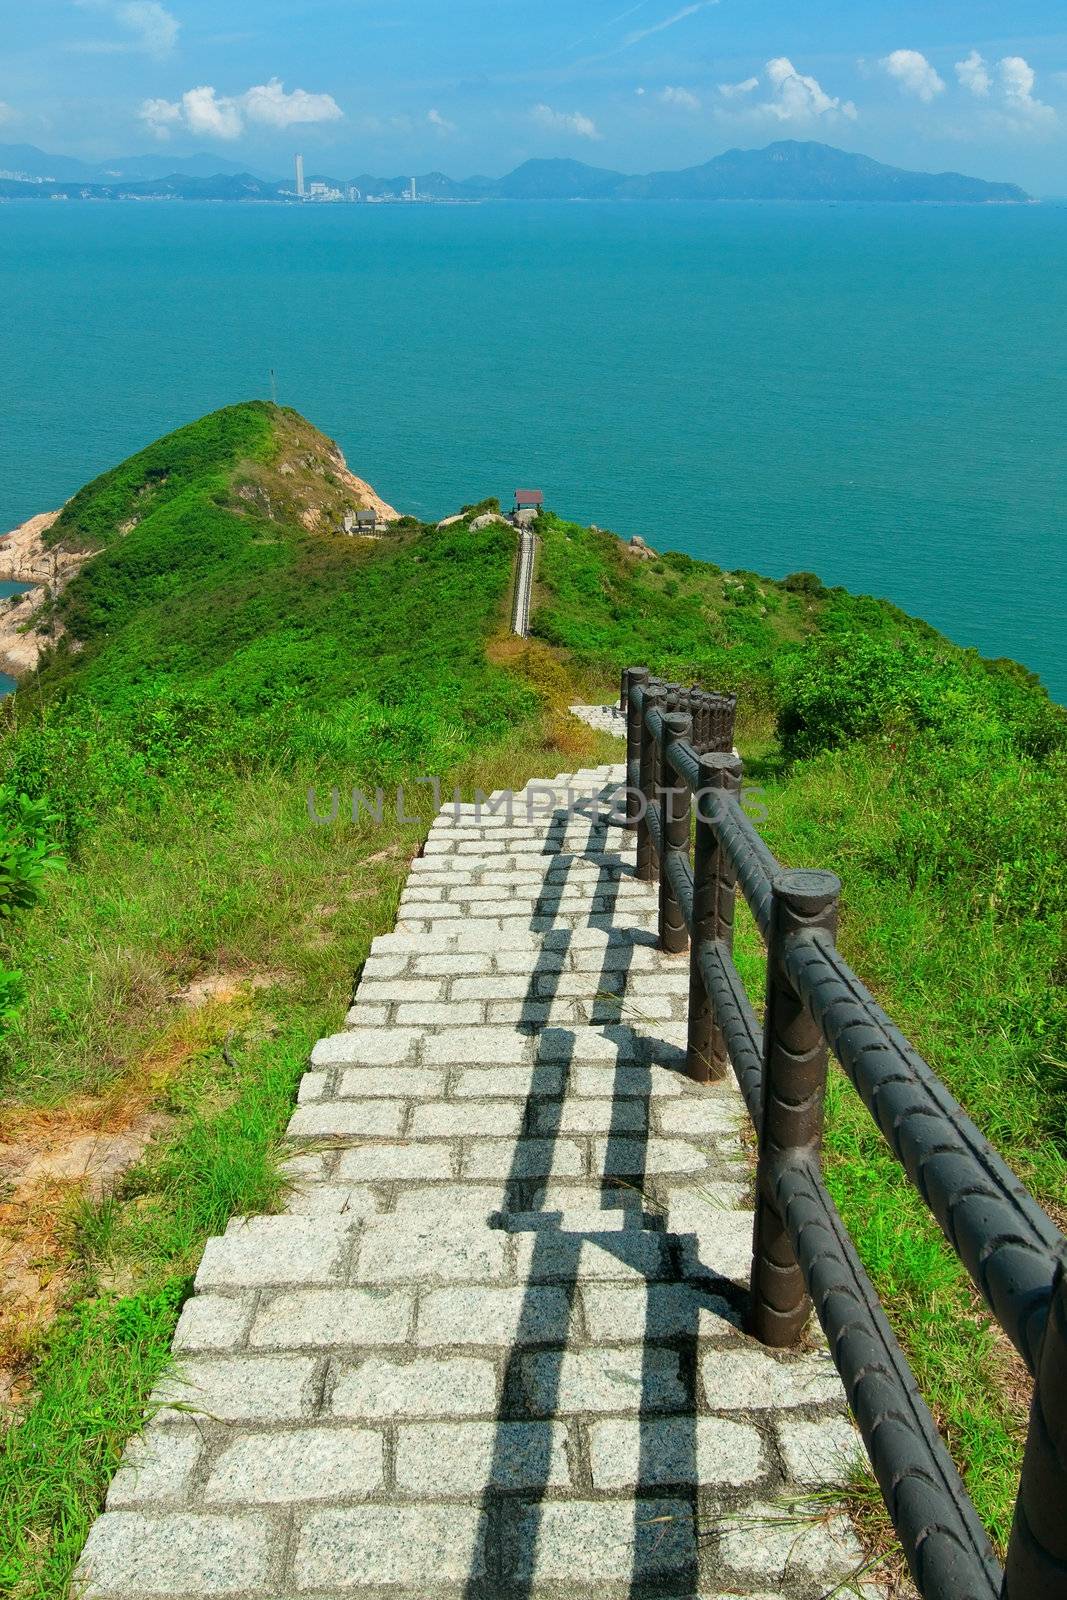  Hiking path surrounded by the sea 